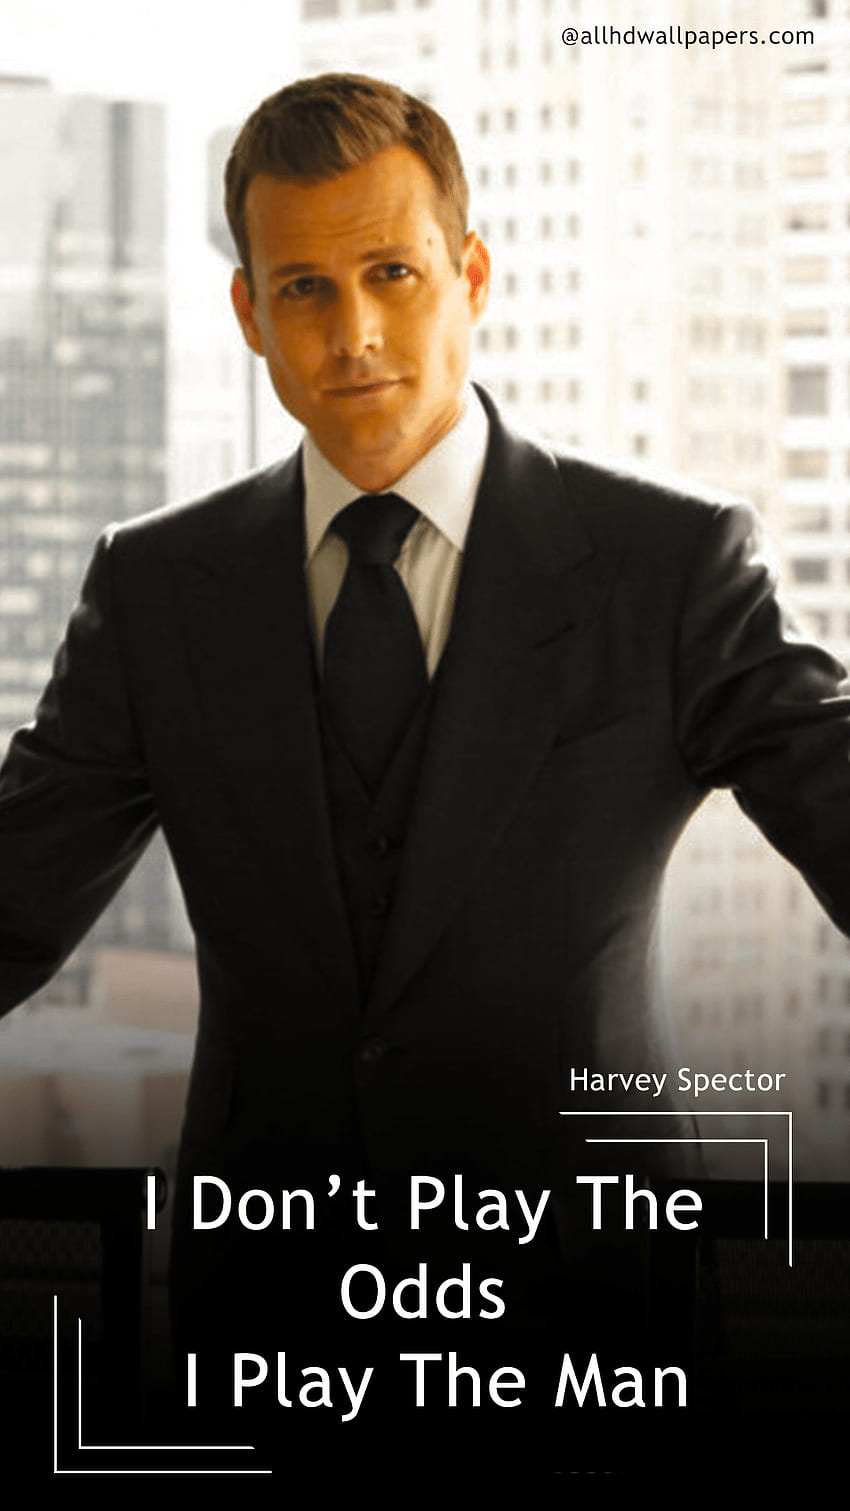 These Kickass Harvey Specter Quotes Will Make Your Day!